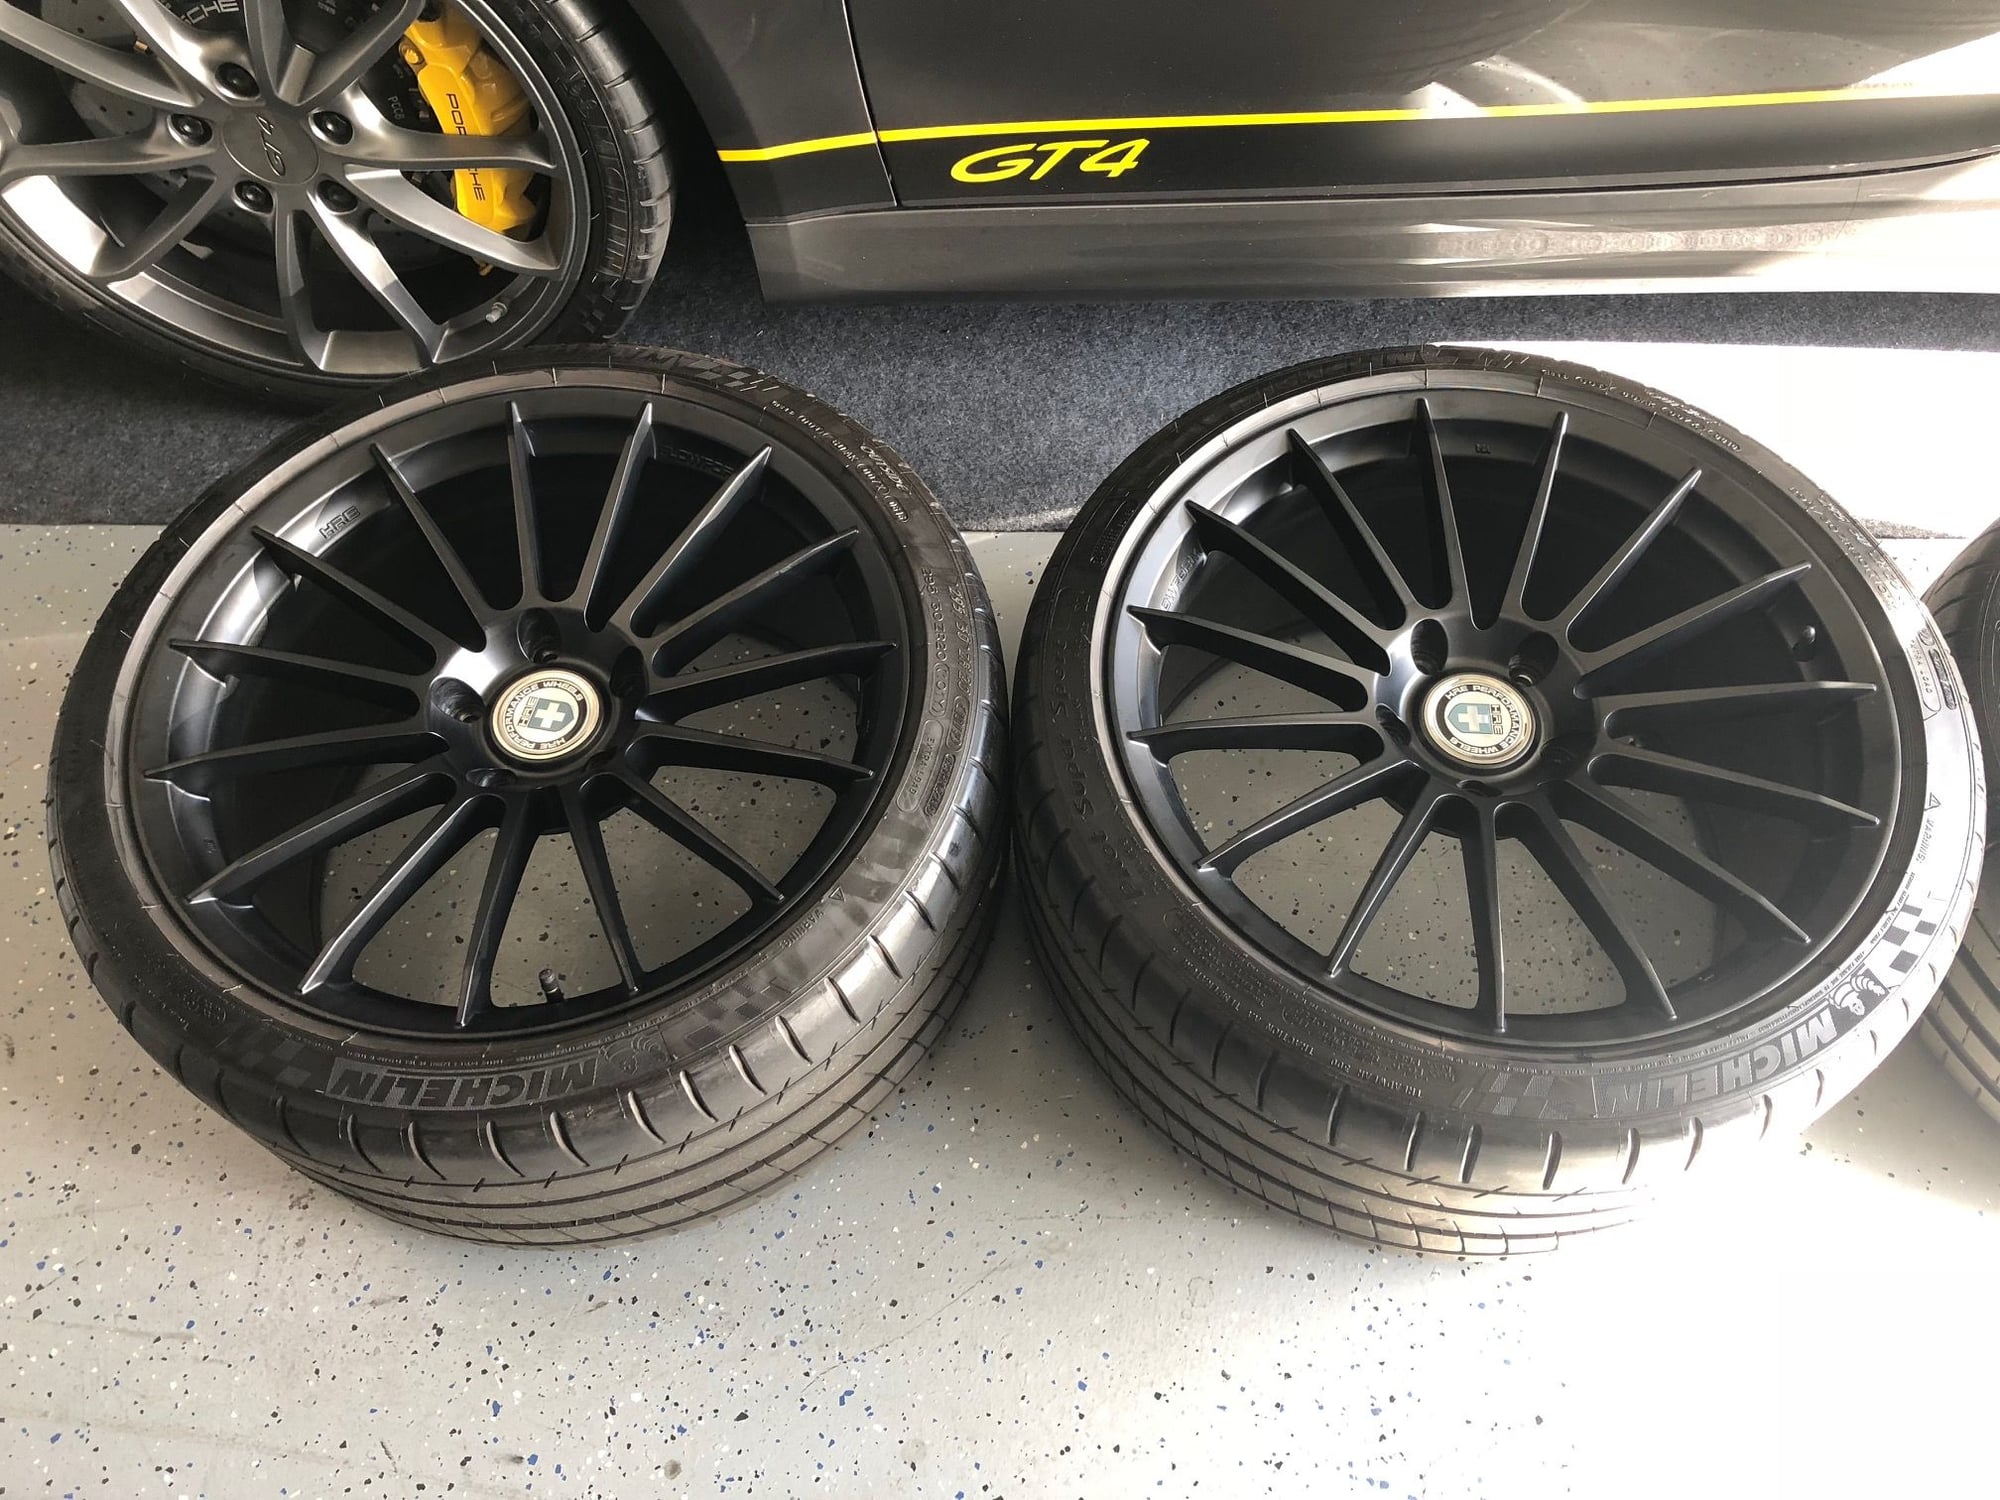 Wheels and Tires/Axles - FS: HRE FF15 20-inch Wheels - Tires - TPMS - Only 800 miles! - Used - 2016 Porsche Cayman GT4 - 2012 to 2016 Porsche Cayman - San Jose, CA 95131, United States